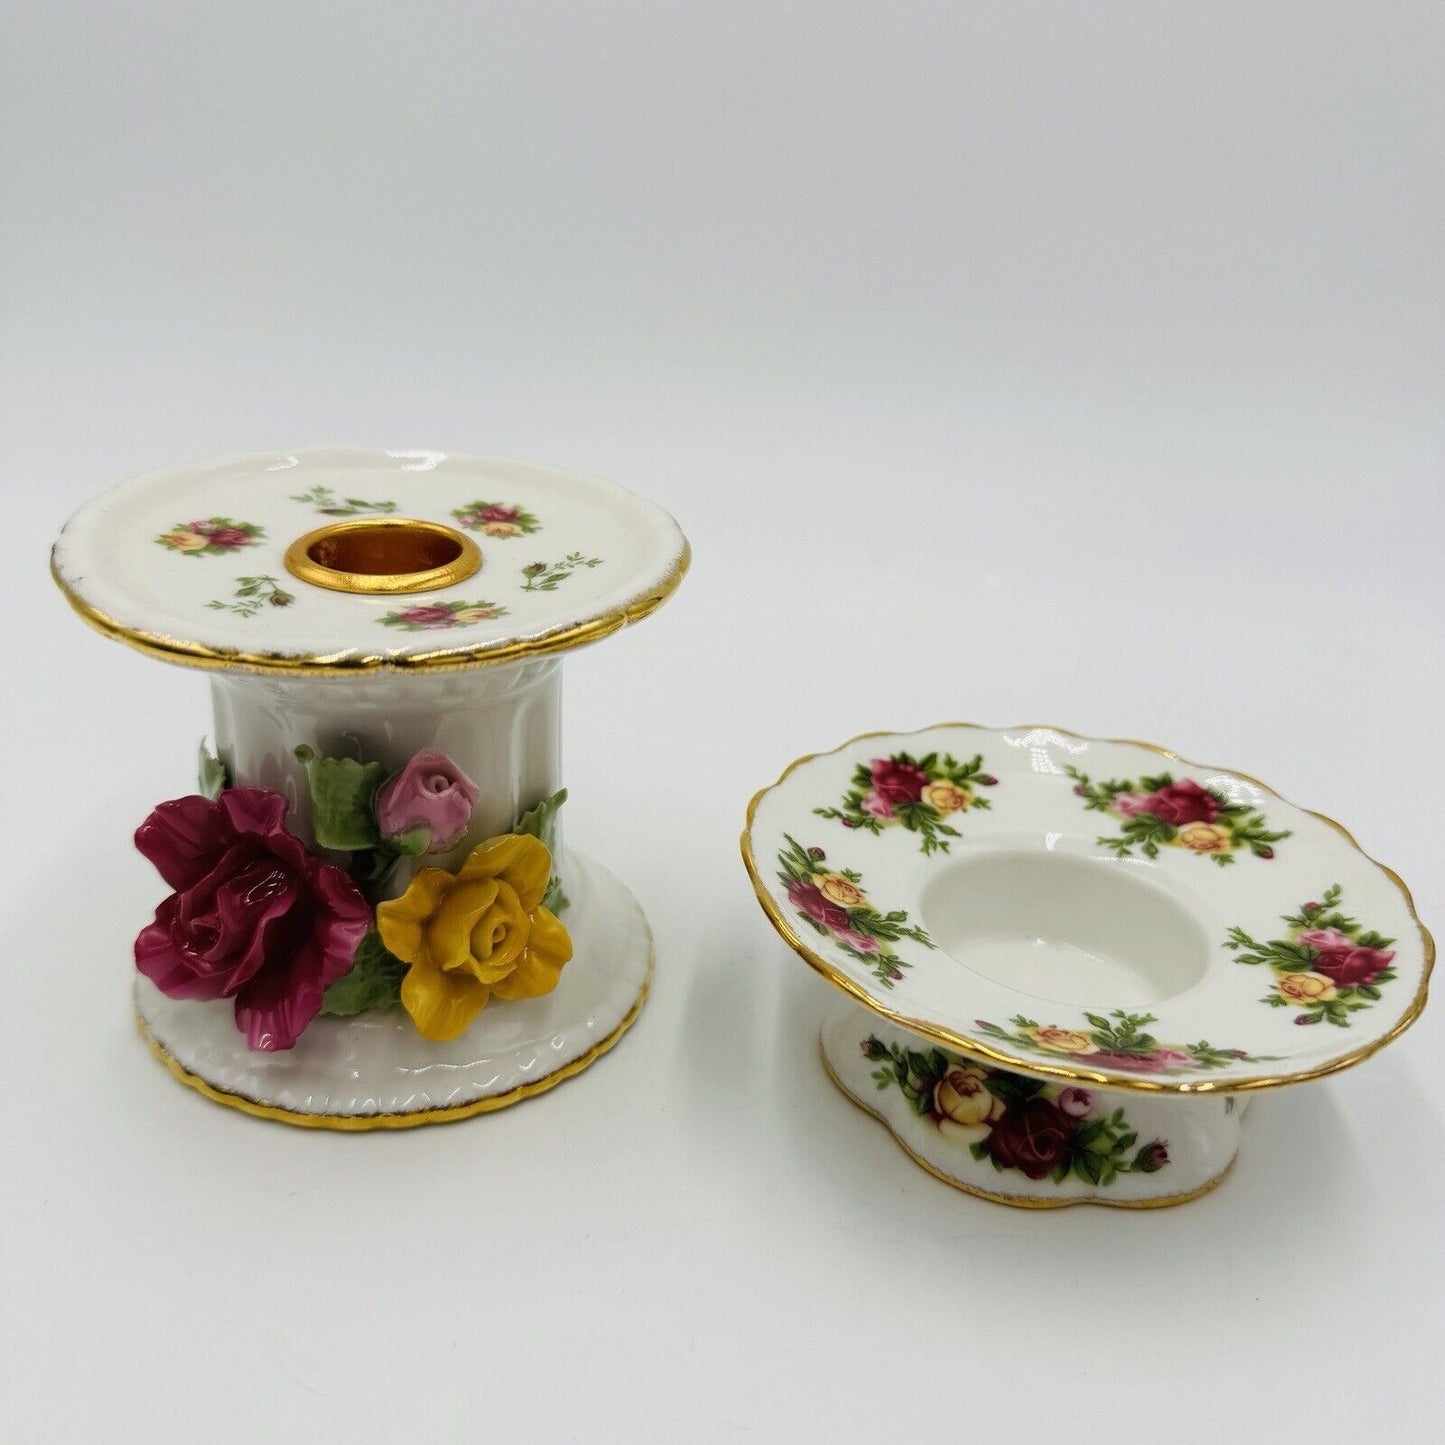 Royal Albert Old Country Roses Porcelain Candle Holders Set Christmas Decor